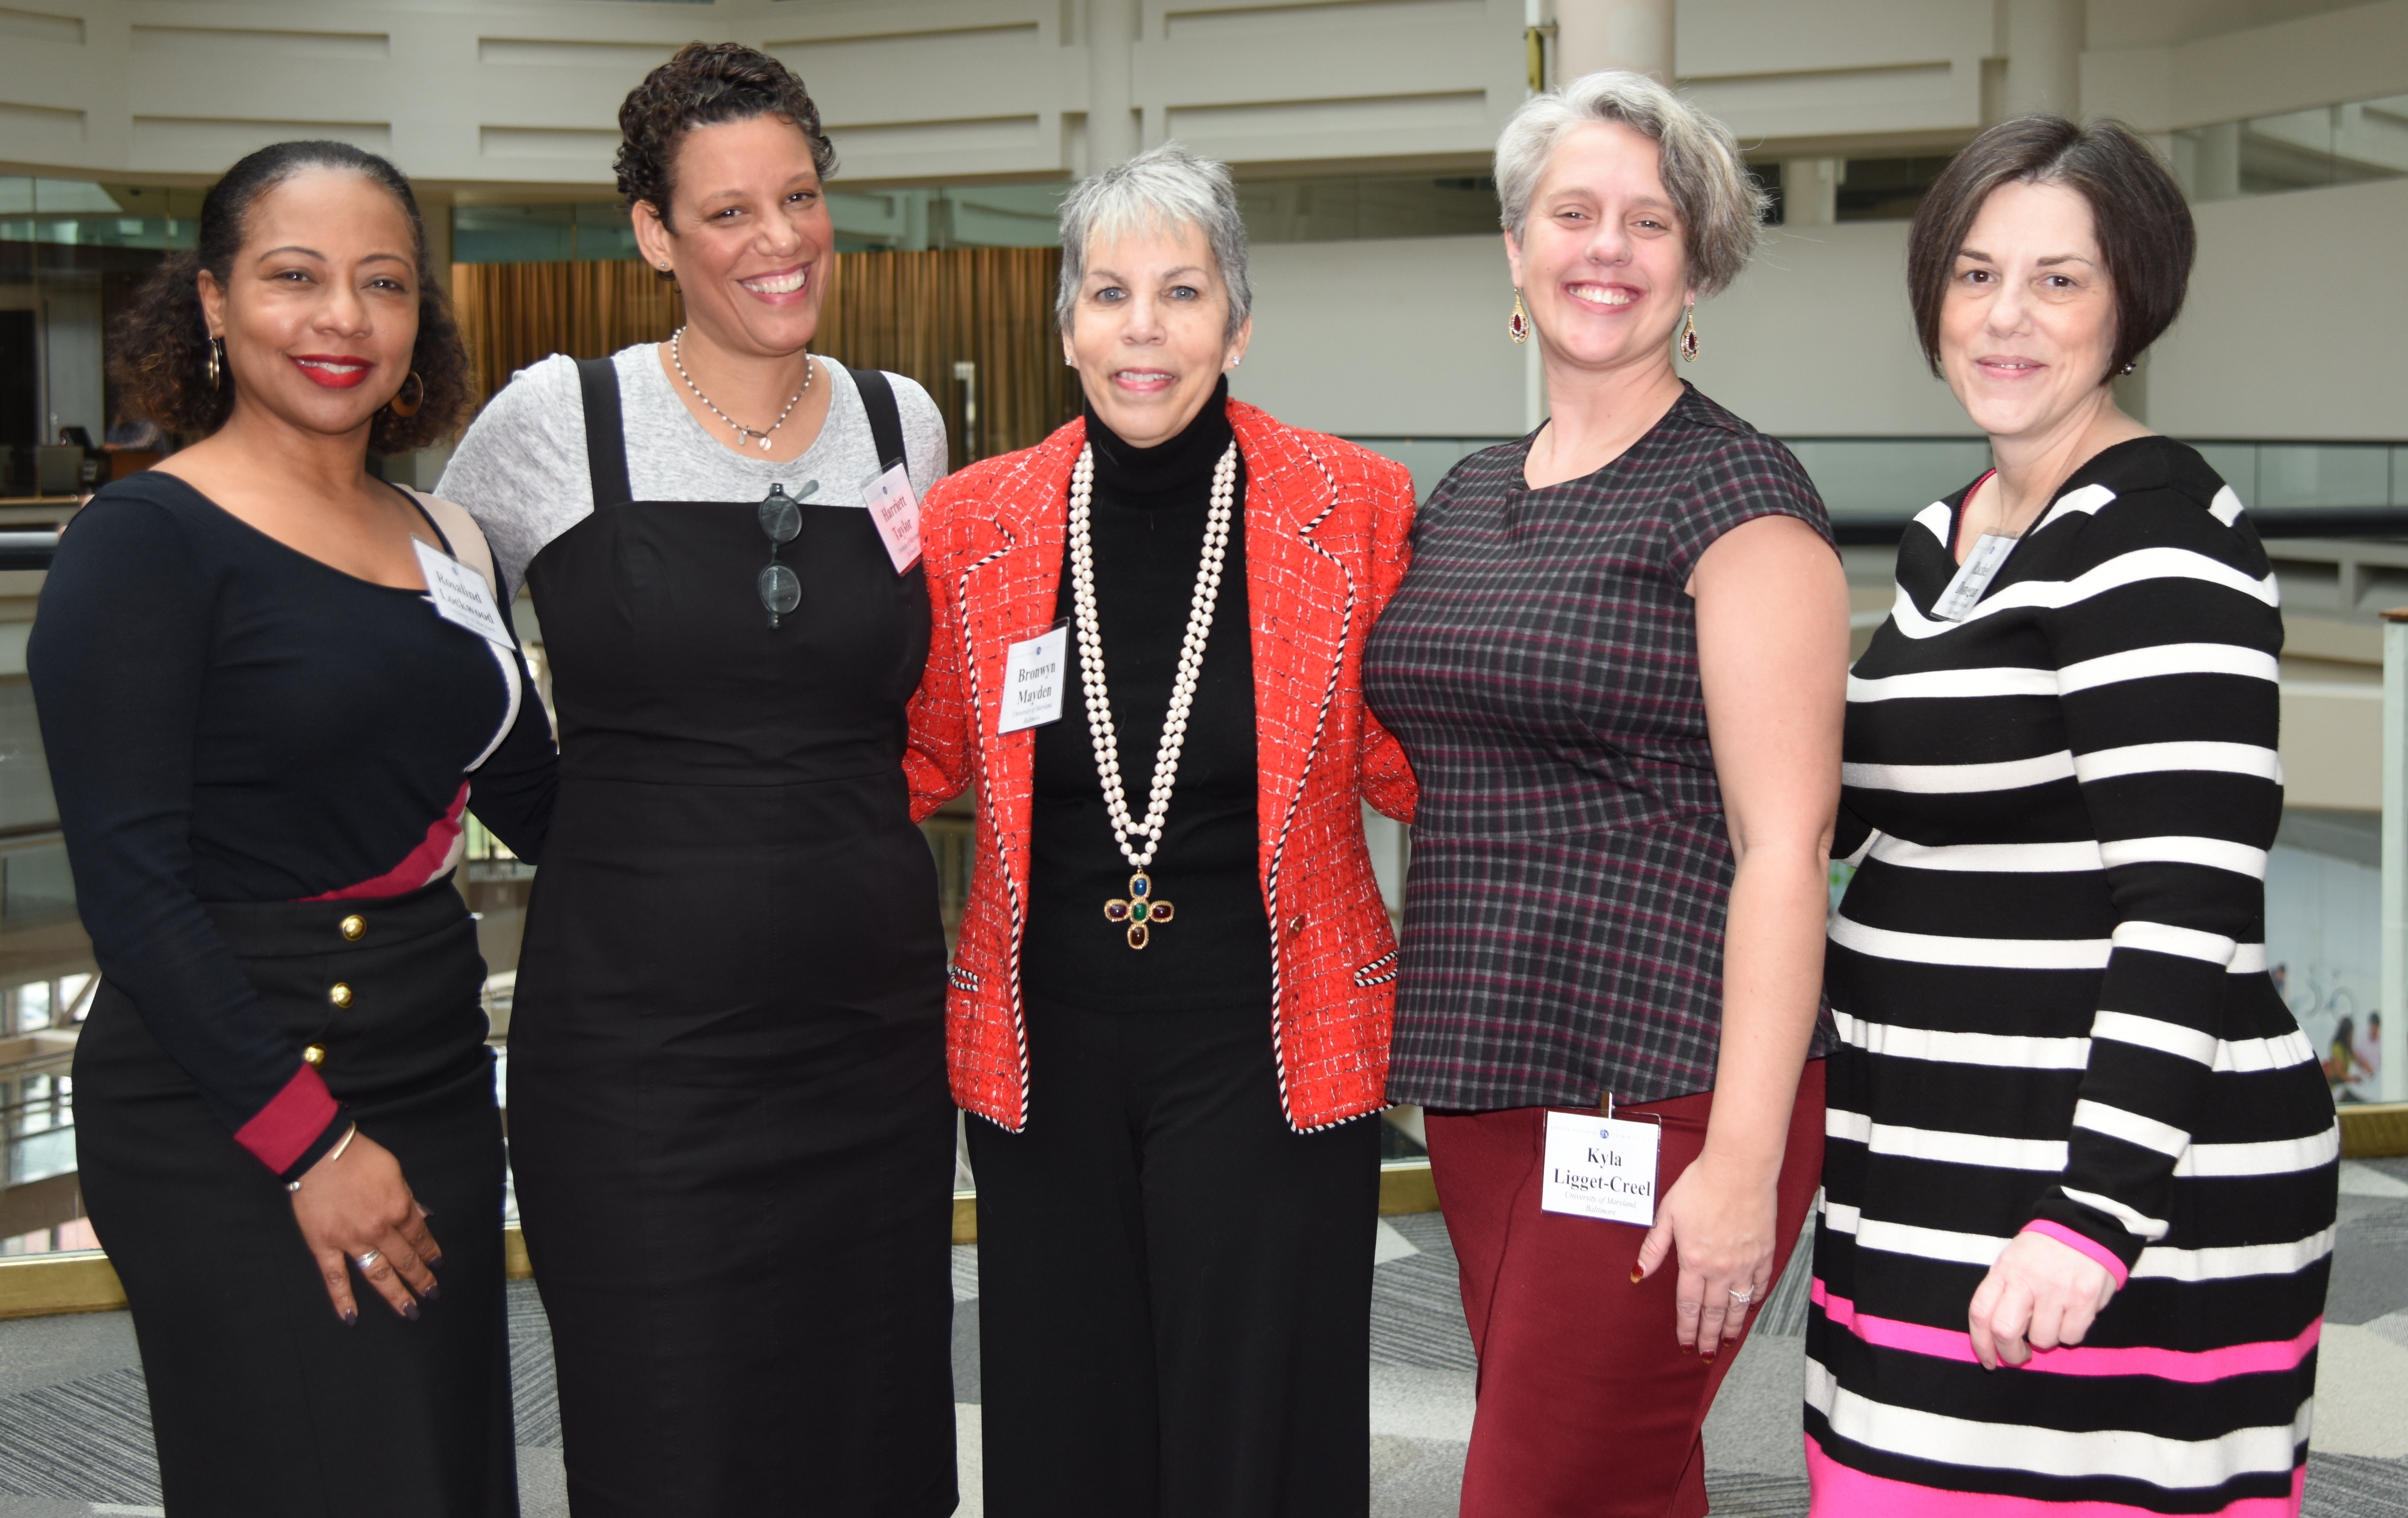 From left, Rosalind Lockwood, executive director, Furman L. Templeton Preparatory Academy; Henriette Taylor, director of partnerships, Promise Heights; Brownyn Mayden, executive director, Promise Heights; Kyla Liggett-Creel, director of research and evaluation, Promise Heights; and Rachel Donegan, assistant director, Promise Heights.